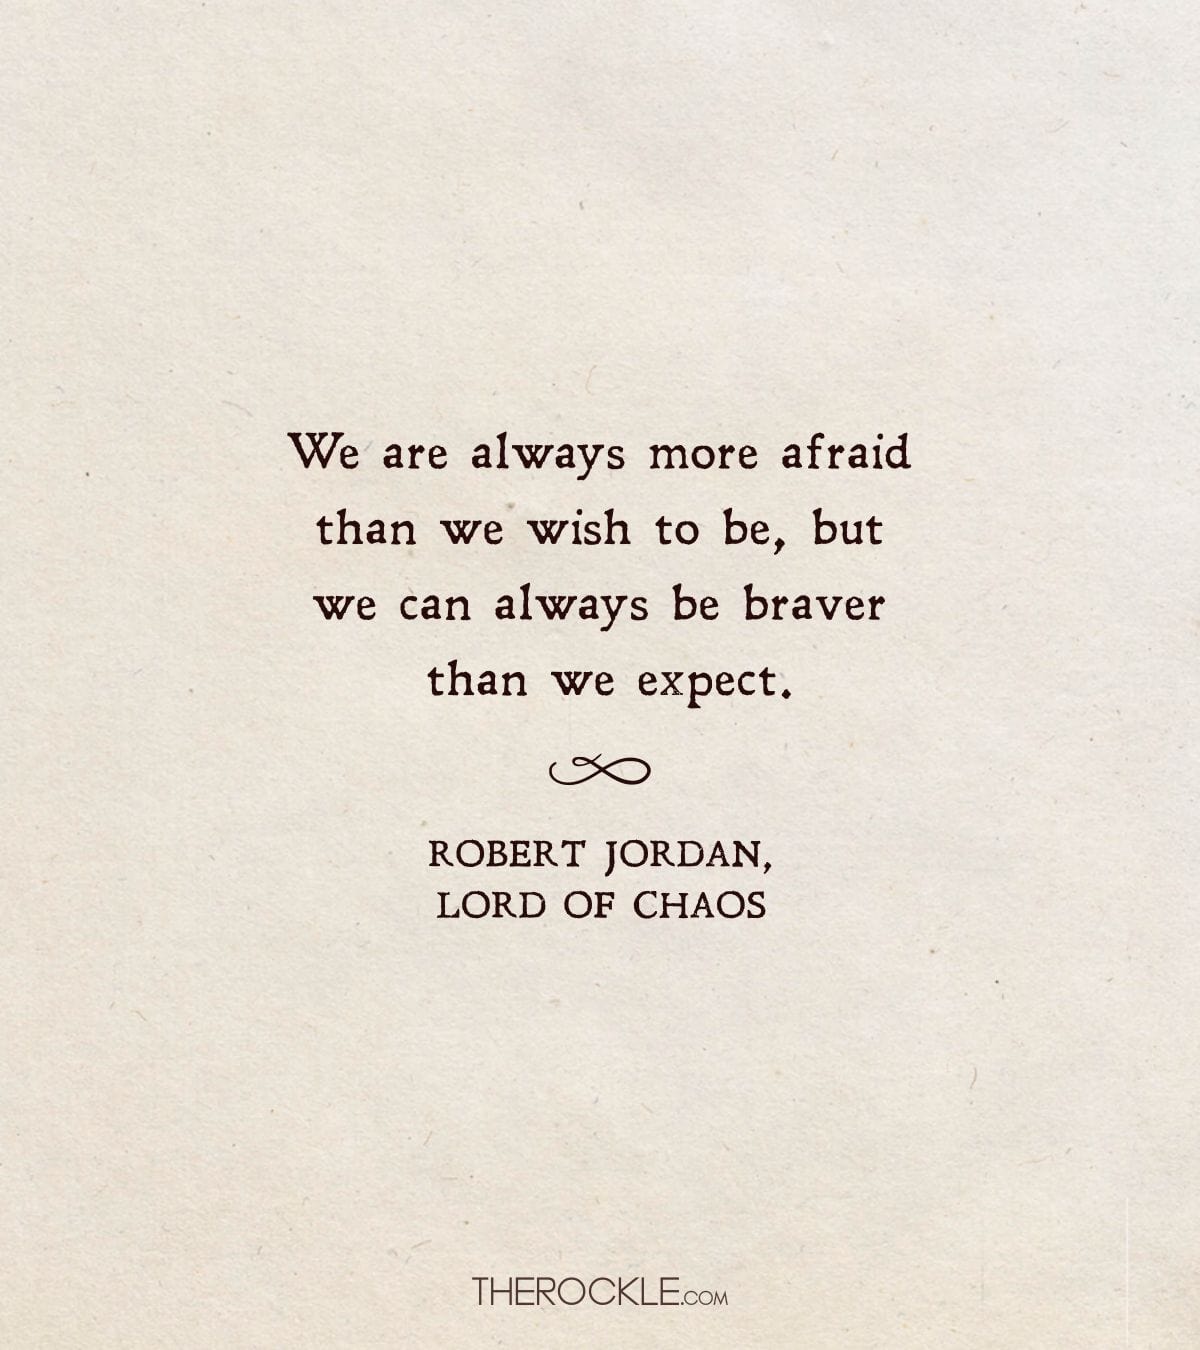 Robert Jordan's quote about facing your fears